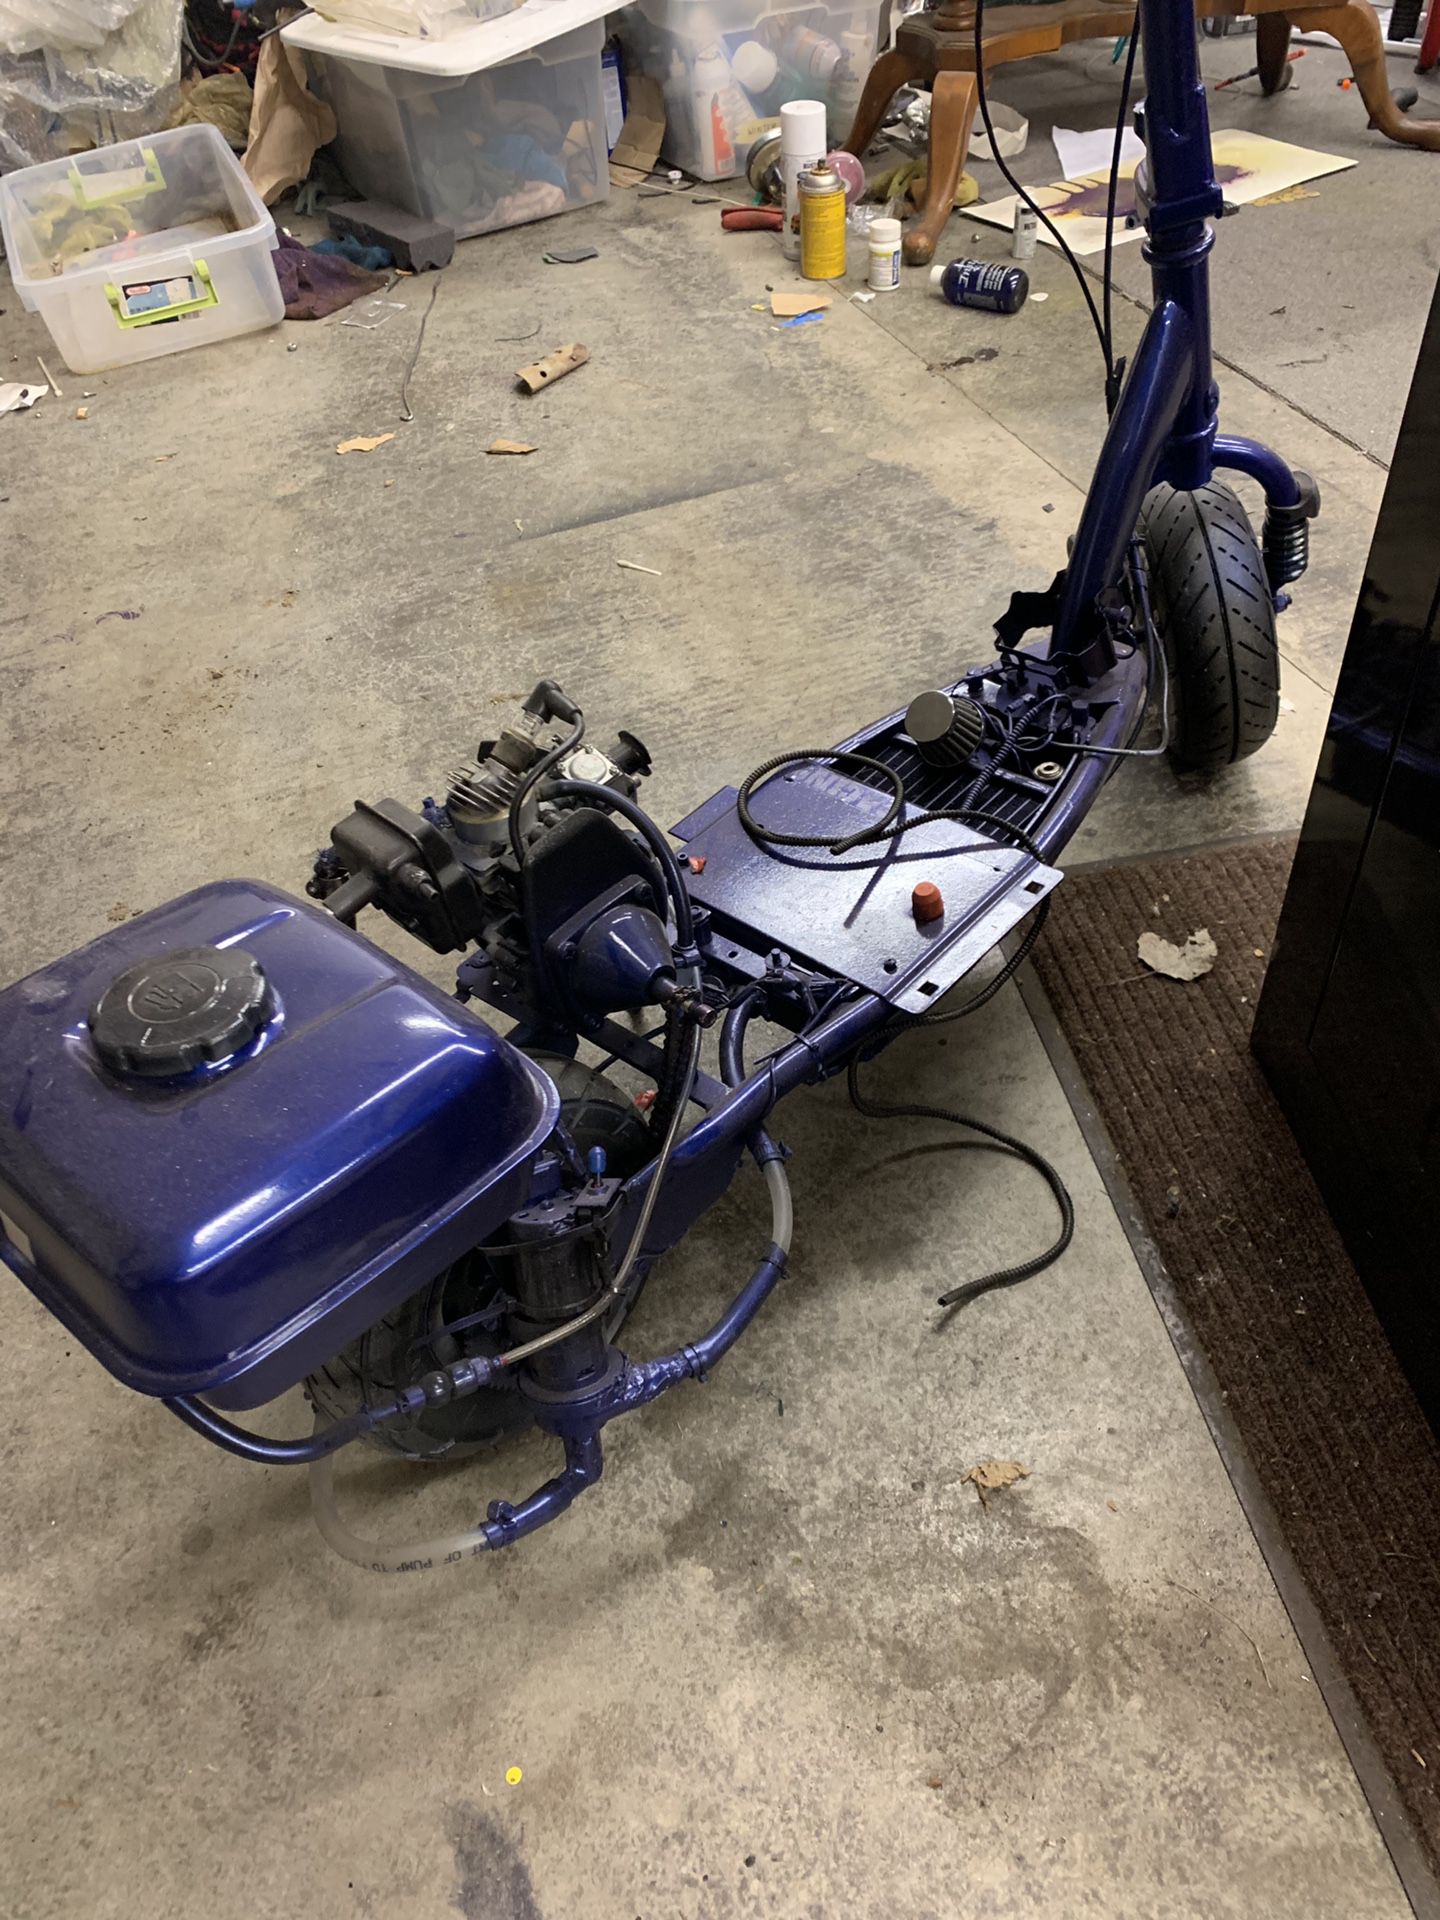 Custom liquid cooled 26cc scooter project not completed yet!!